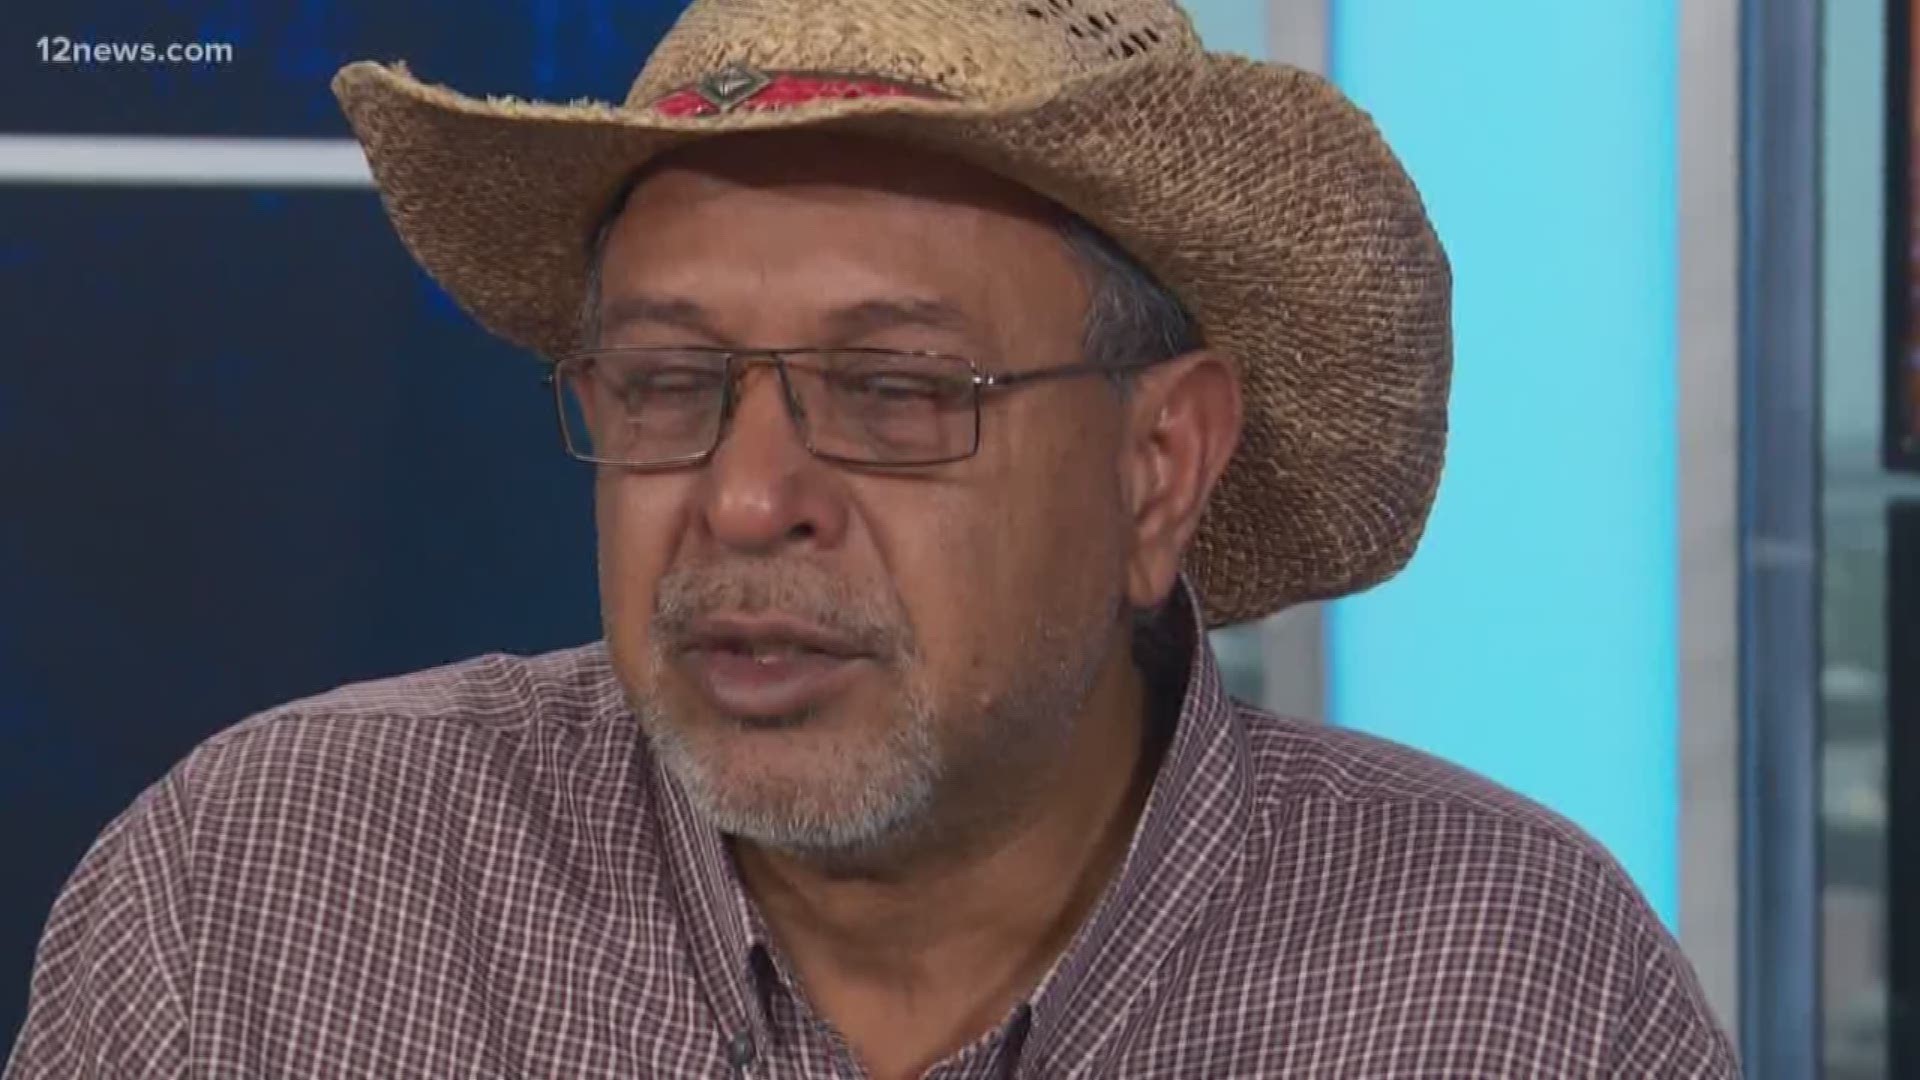 Mehmood Mohiuddin is an immigrant from Pakistan and the owner of the Hitching Post Saloon in Apache Junction. He believes the city is discriminating against him because of his ethnicity and is suing.